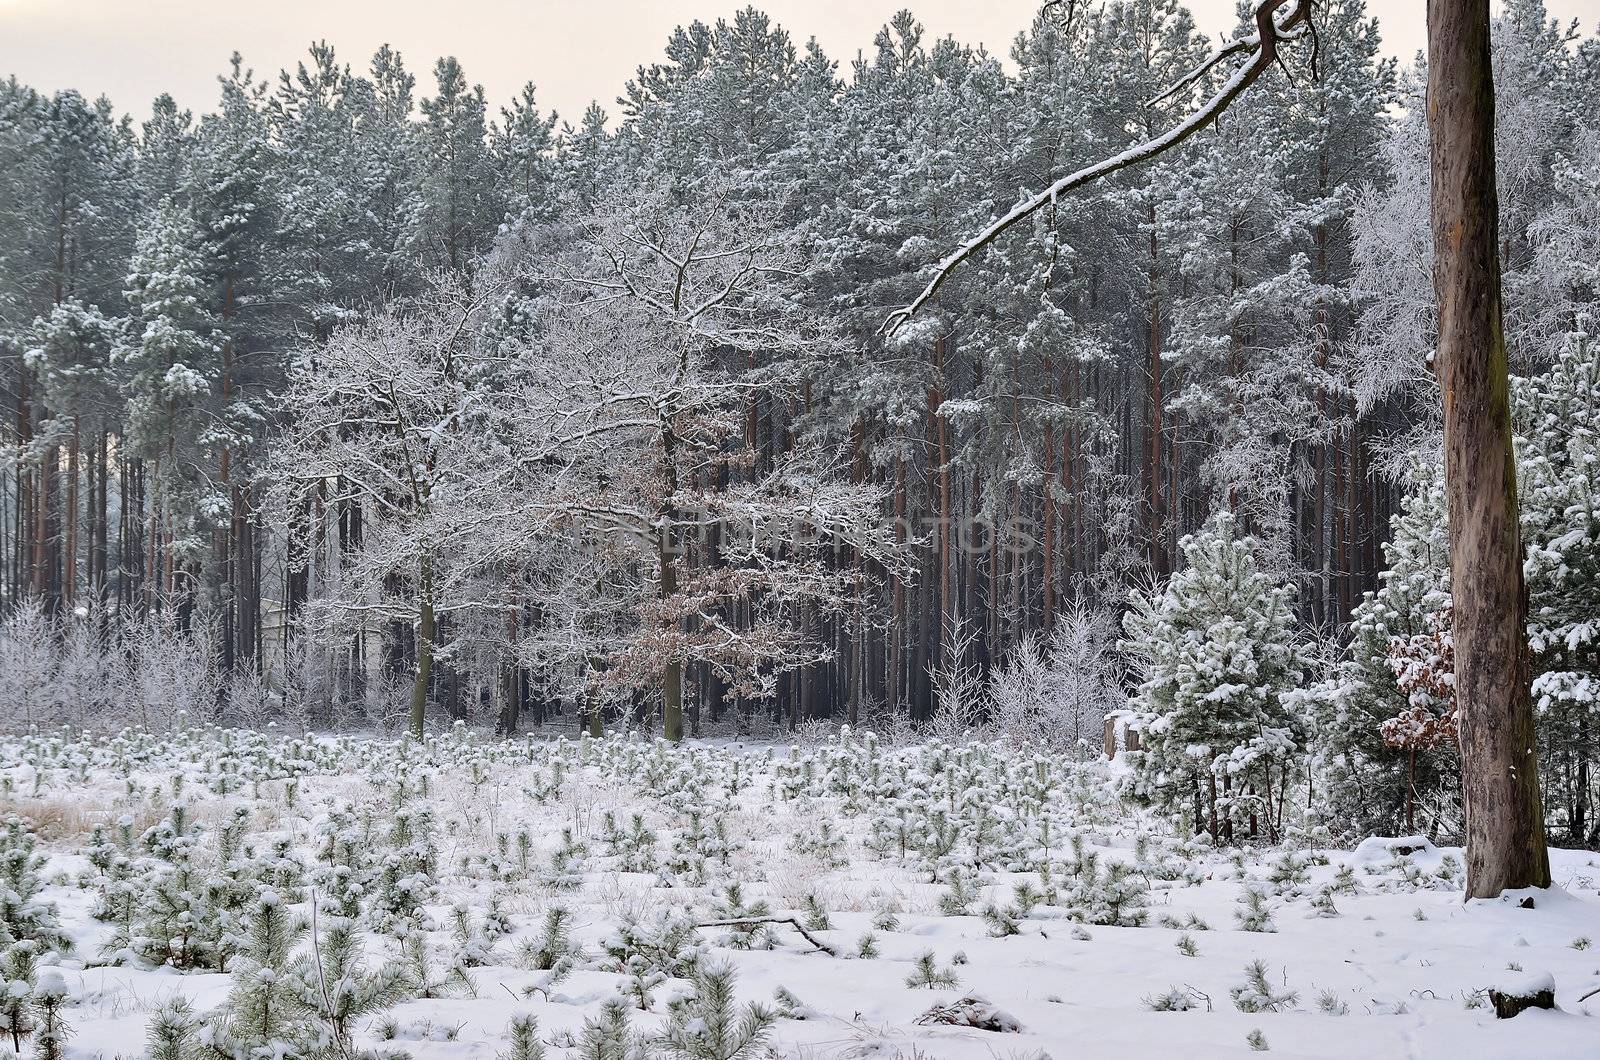 The photo shows a forest in winter, on a cold day, covered in snow and rime, under a cloudy sky. You can see young pine and birch trees.